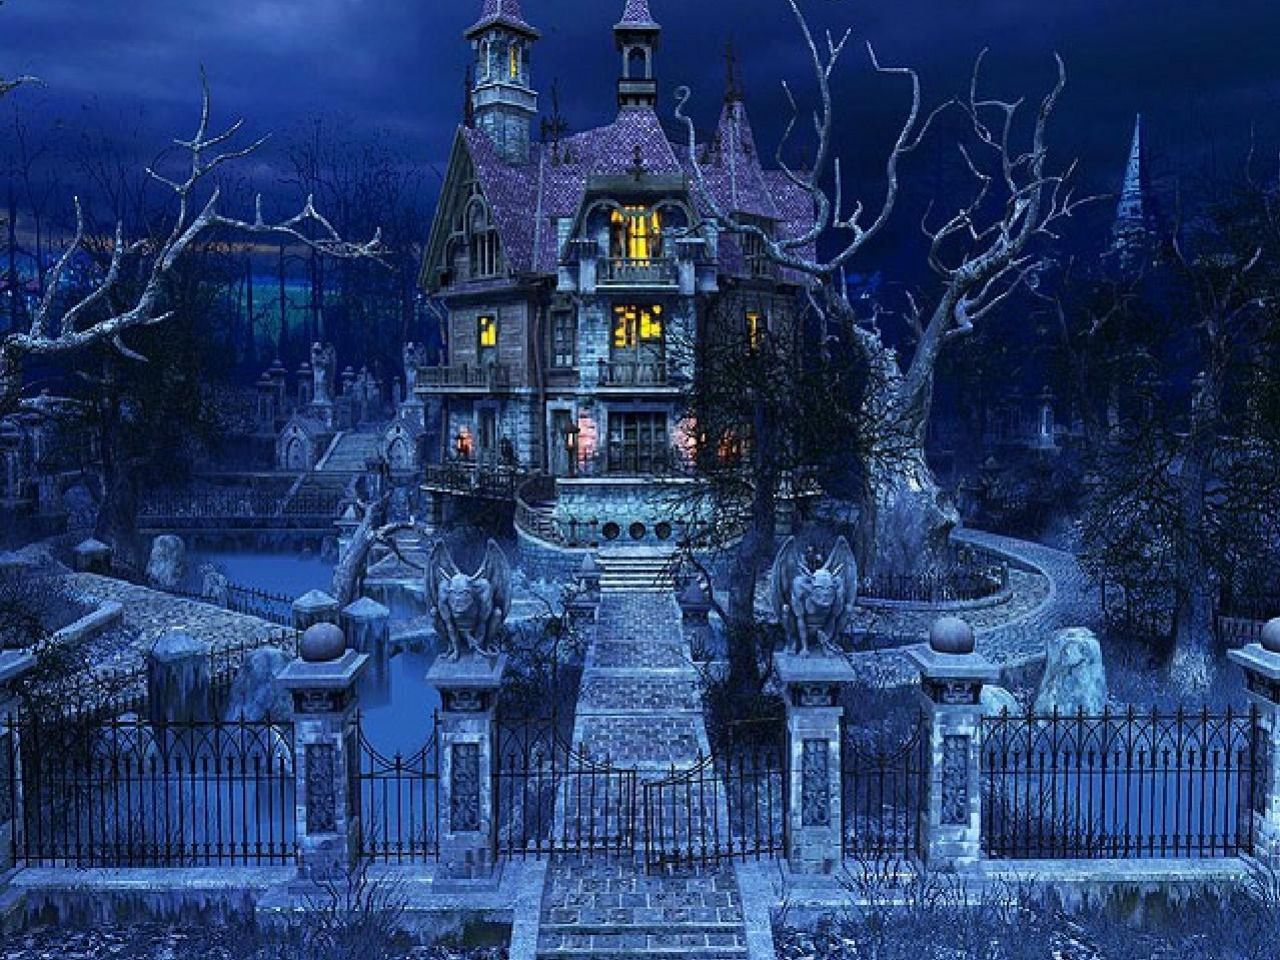 Spooky Mansion #spooky #ghosts #spirits #cemetery #haunted #hauntedmansion #hauntedhouses #ar. Haunted mansion wallpaper, Haunted house, Halloween haunted houses